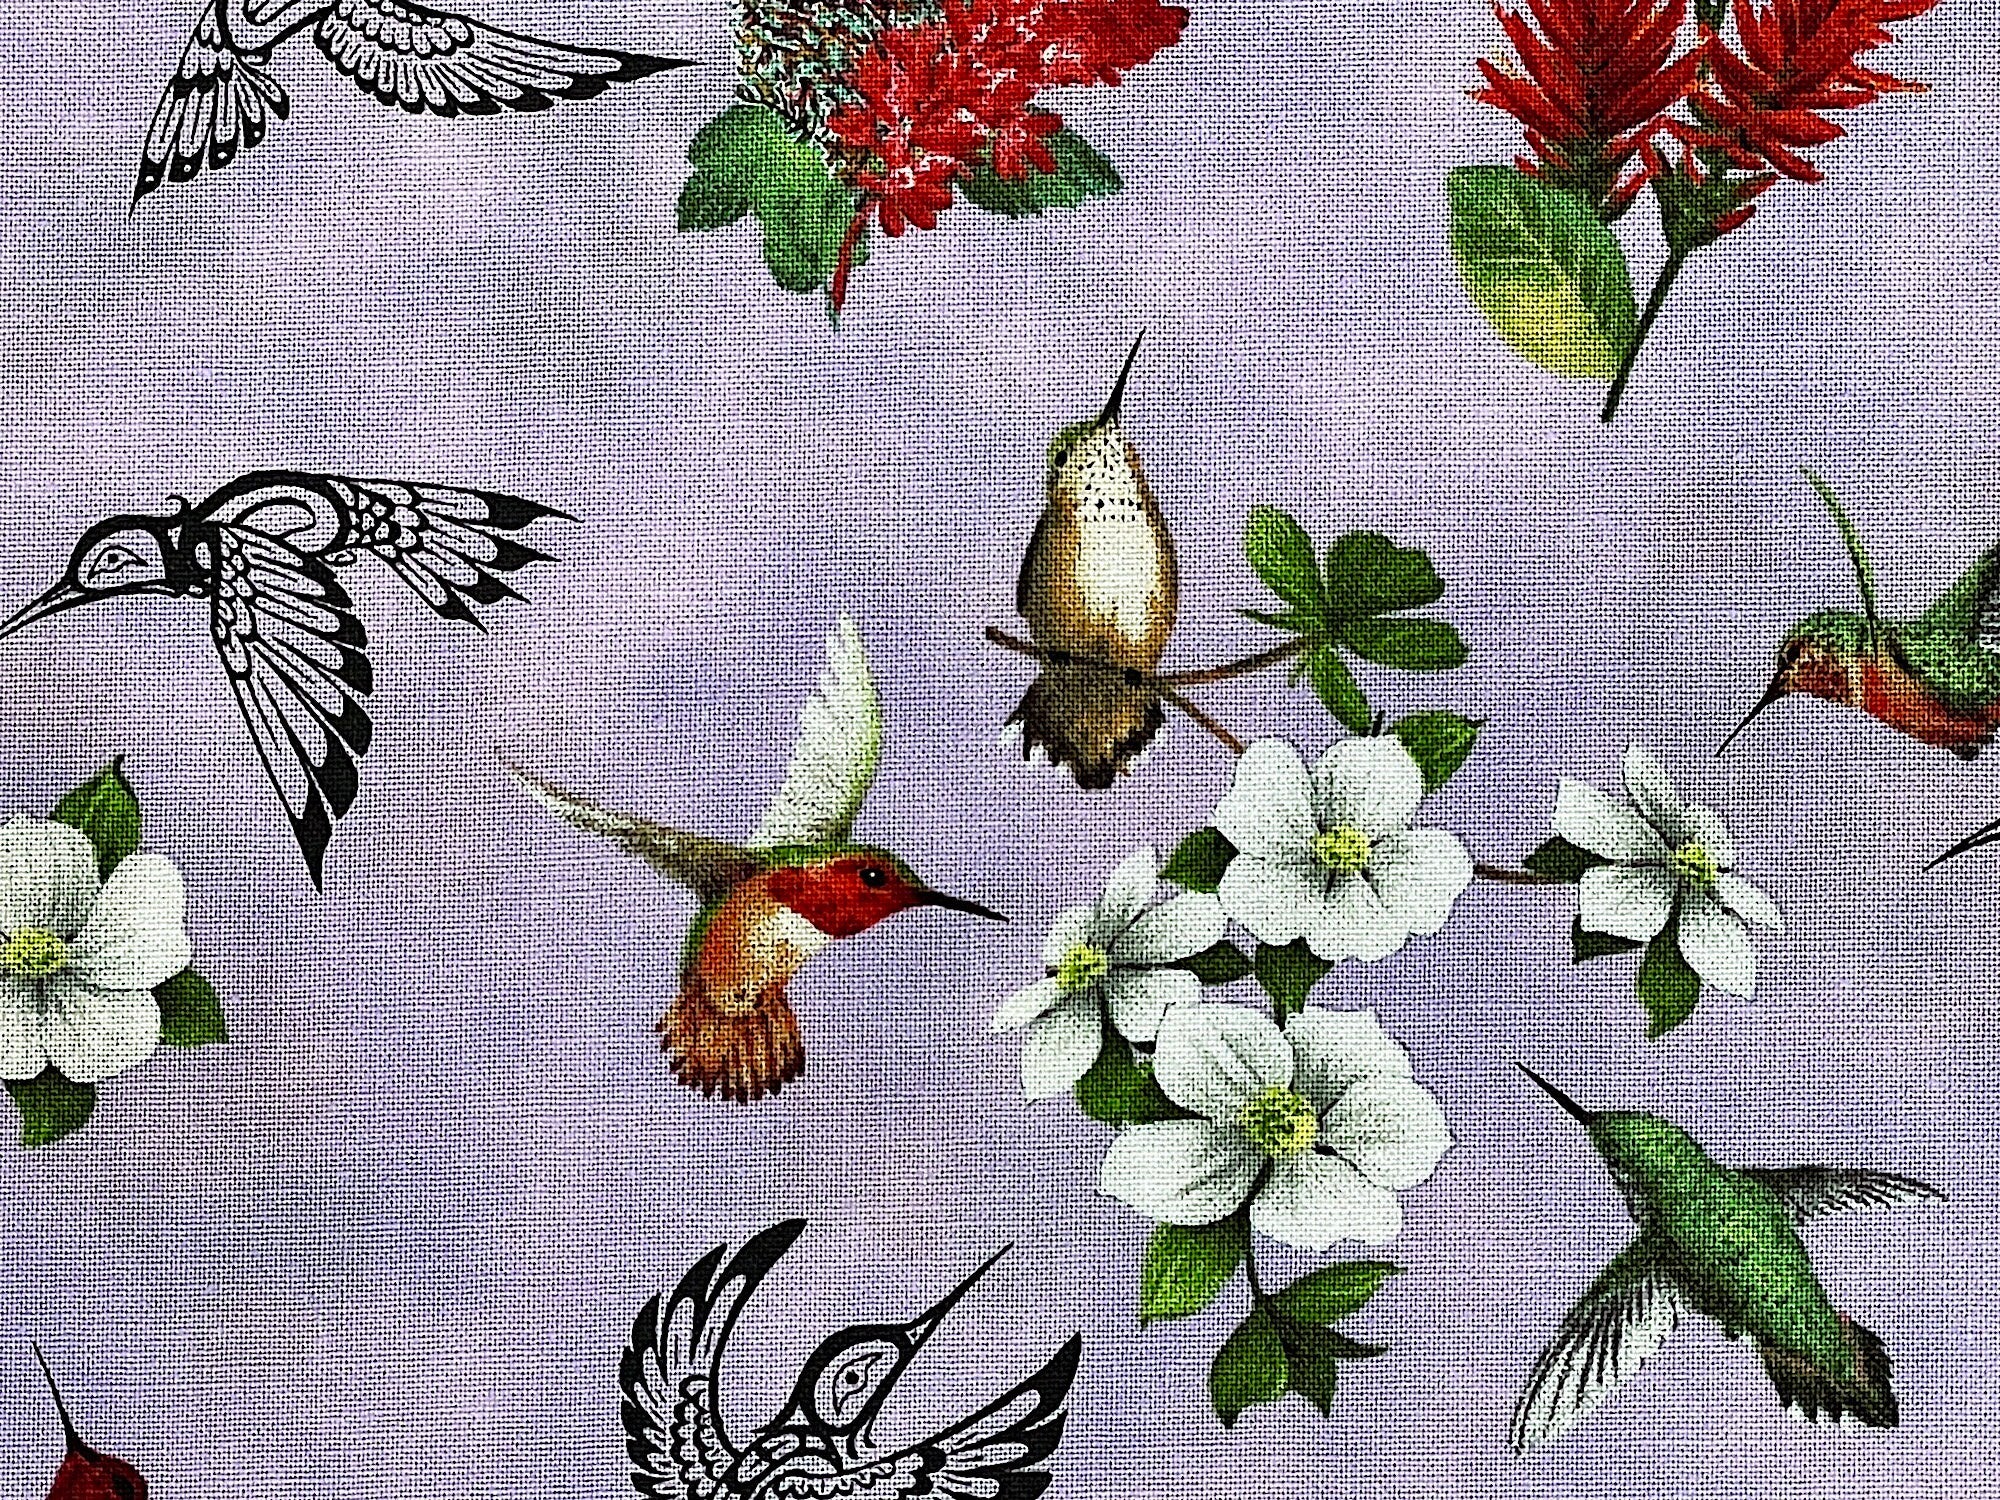 Close up of white flowers and hummingbirds.